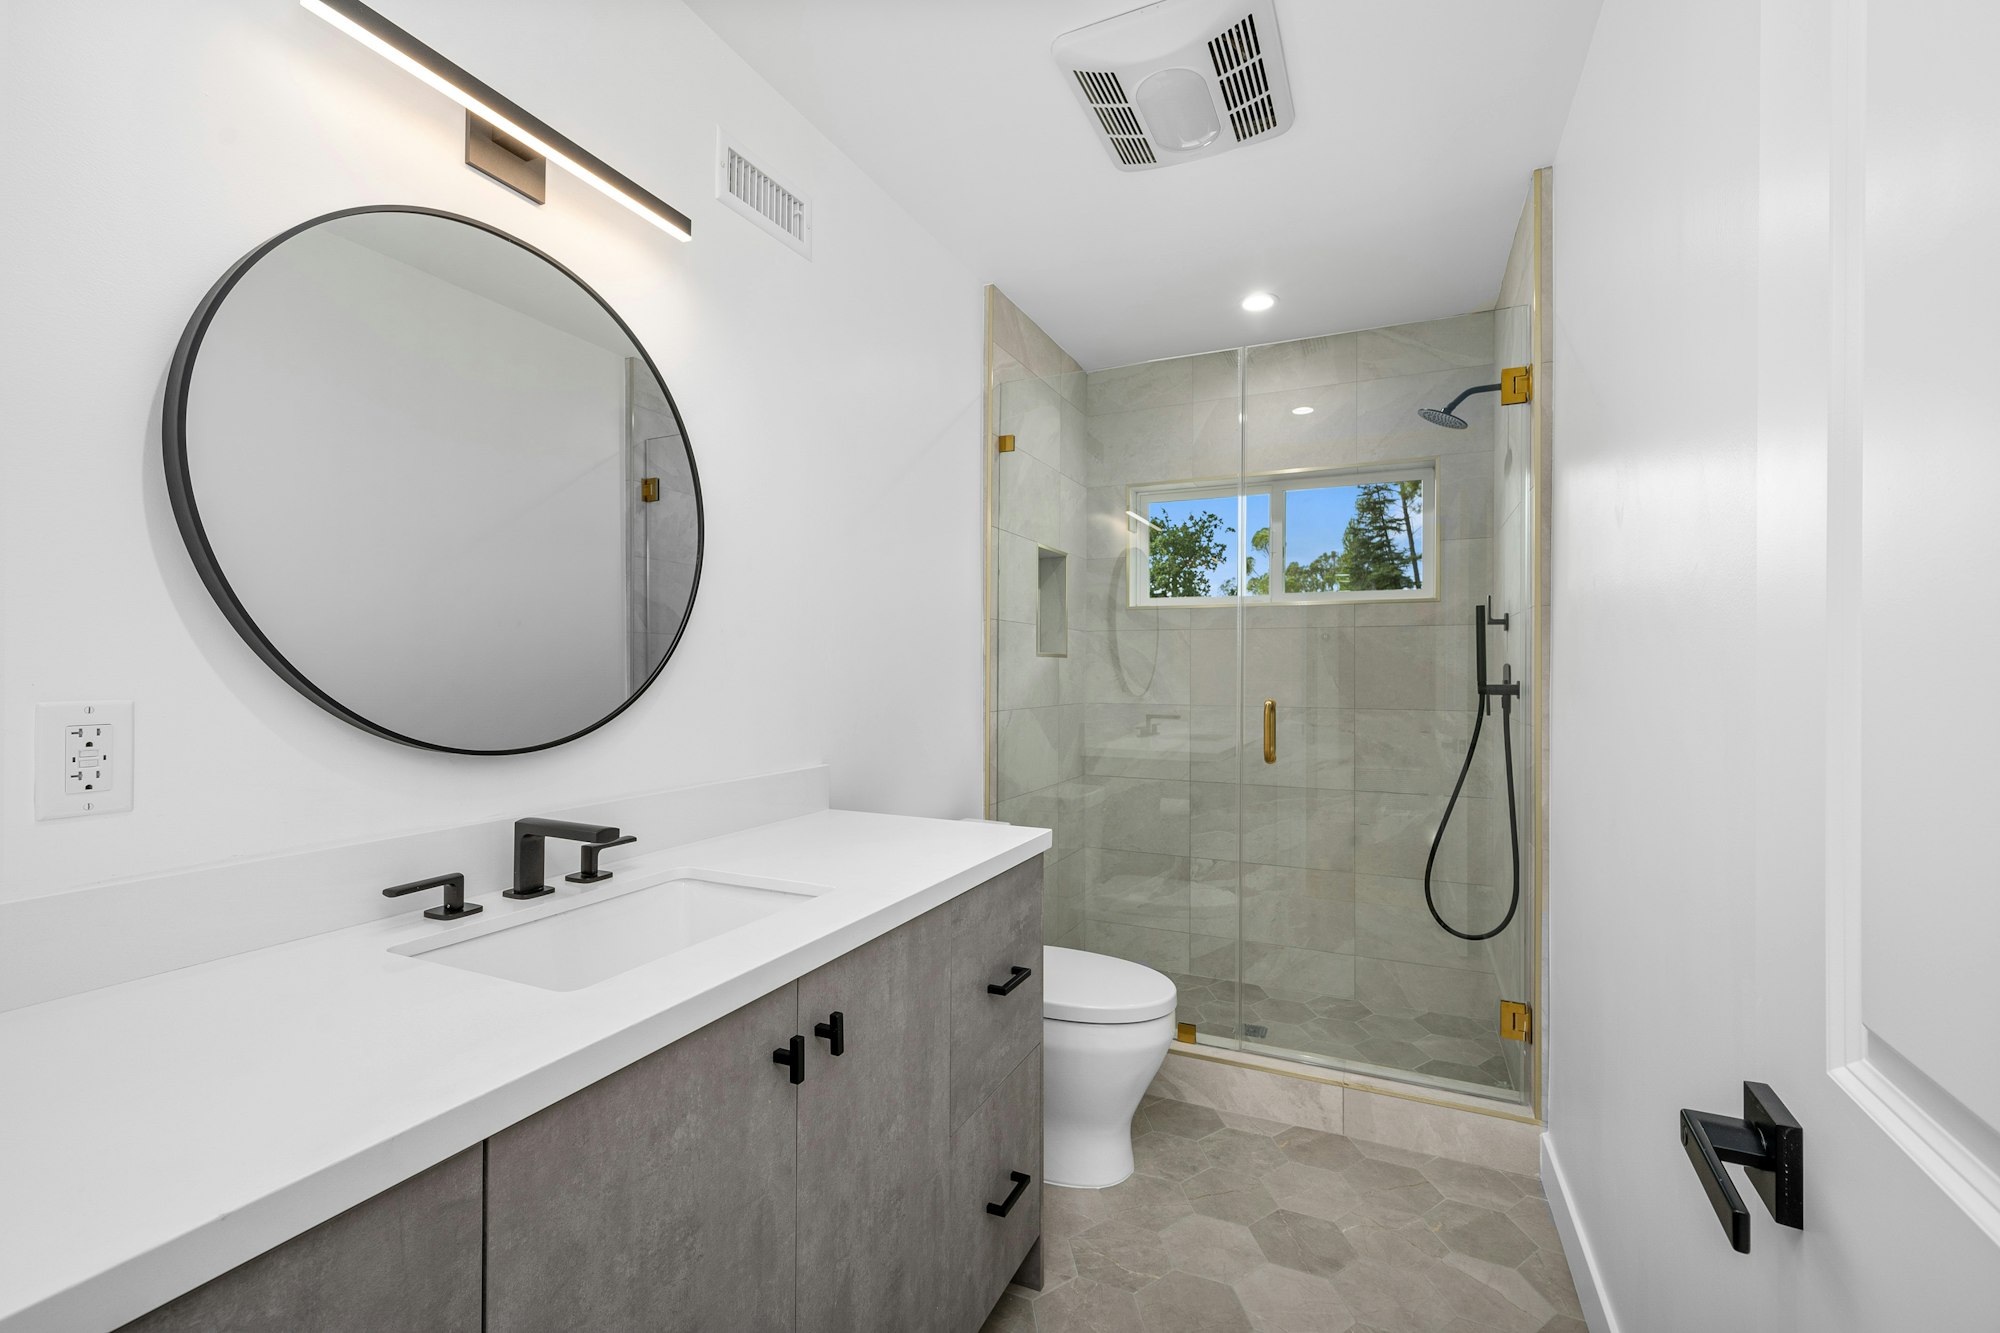 Spacious bathroom in a renovated Los Angeles home